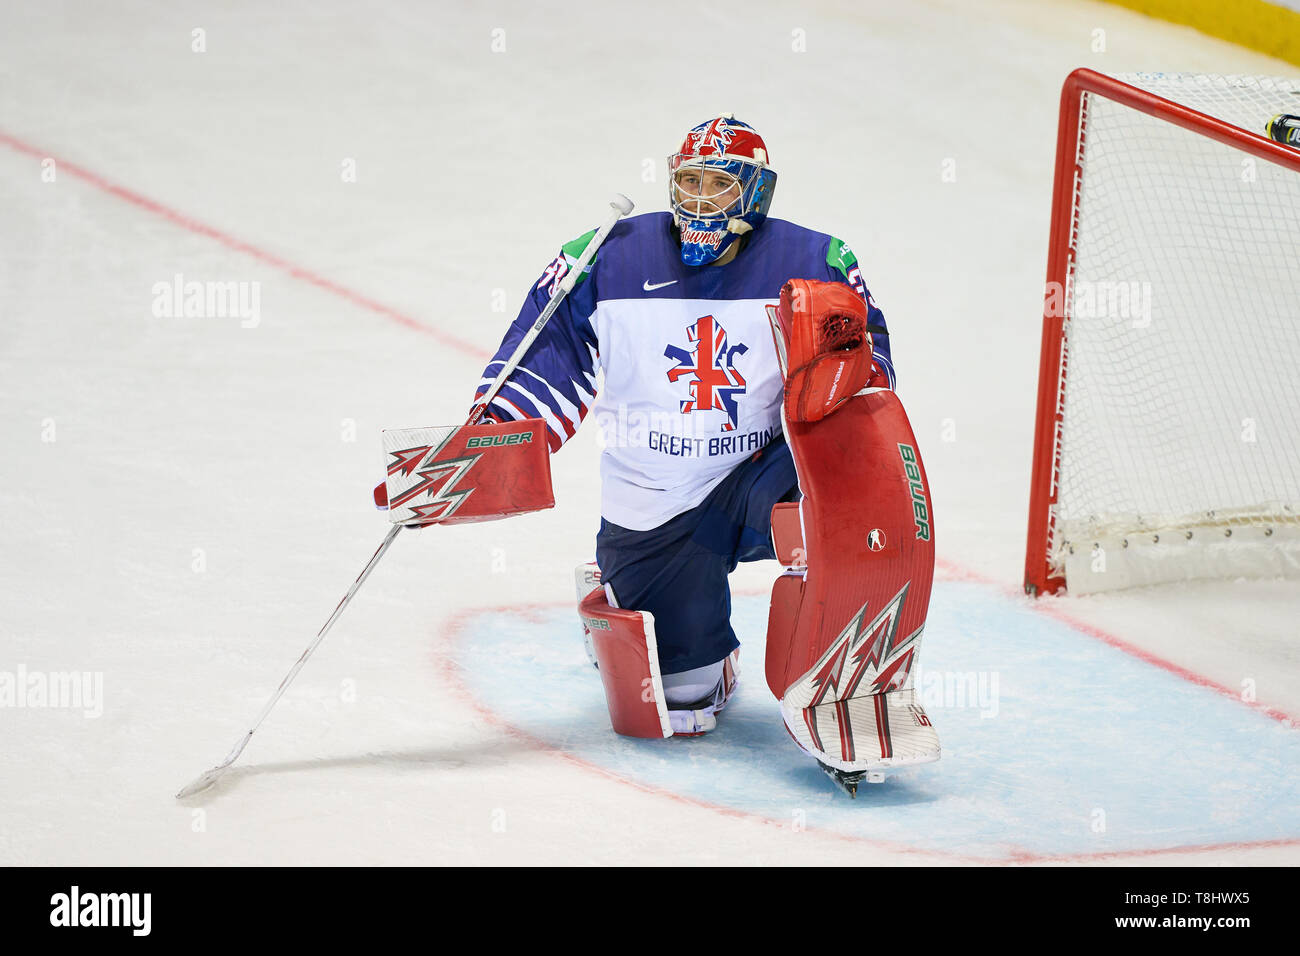 Kosice, Slovakia. 12th May, 2019. Ben BOWNS, GBR 33 frustrated after 8-0 goal CANADA - GREAT BRITAIN 8-0 Preliminary Round Group A IIHF ICE HOCKEY WORLD CHAMPIONSHIPS in Kosice, Slovakia, Slowakei, May 12, 2019, Season 2018/2019, Credit: Peter Schatz/Alamy Live News Stock Photo